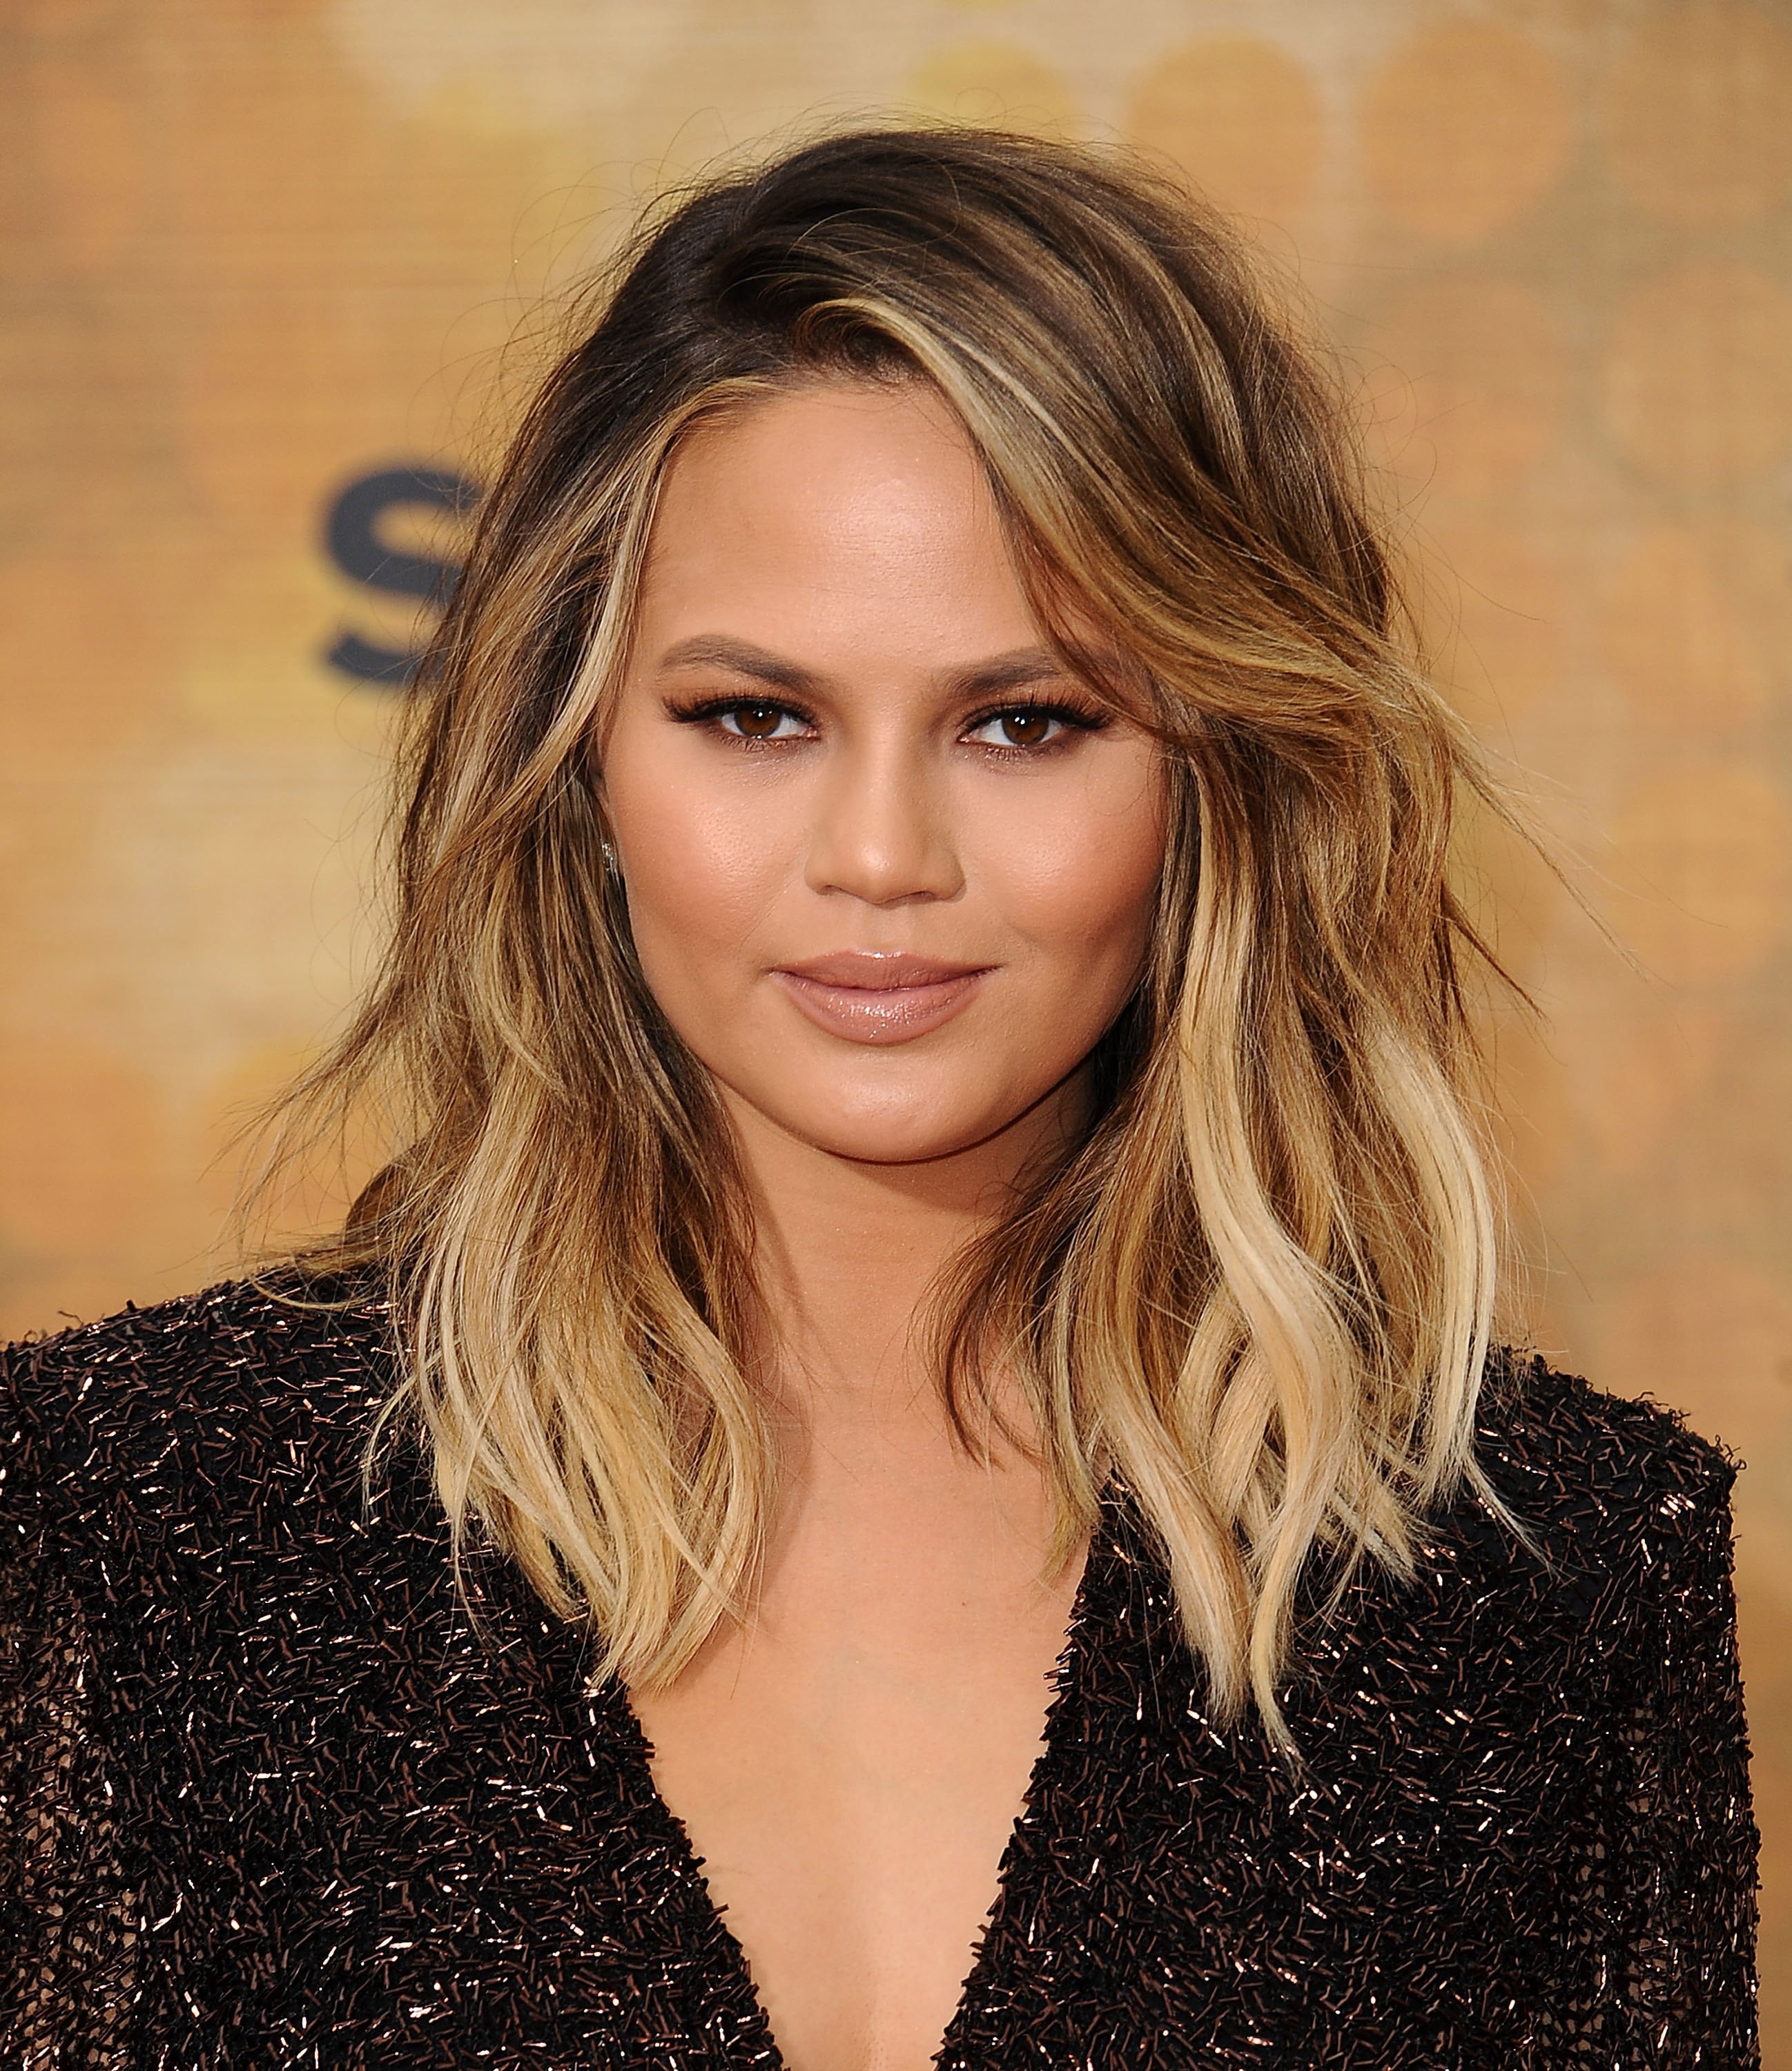 Best Haircuts For Round Faces, According to a Hairstylist